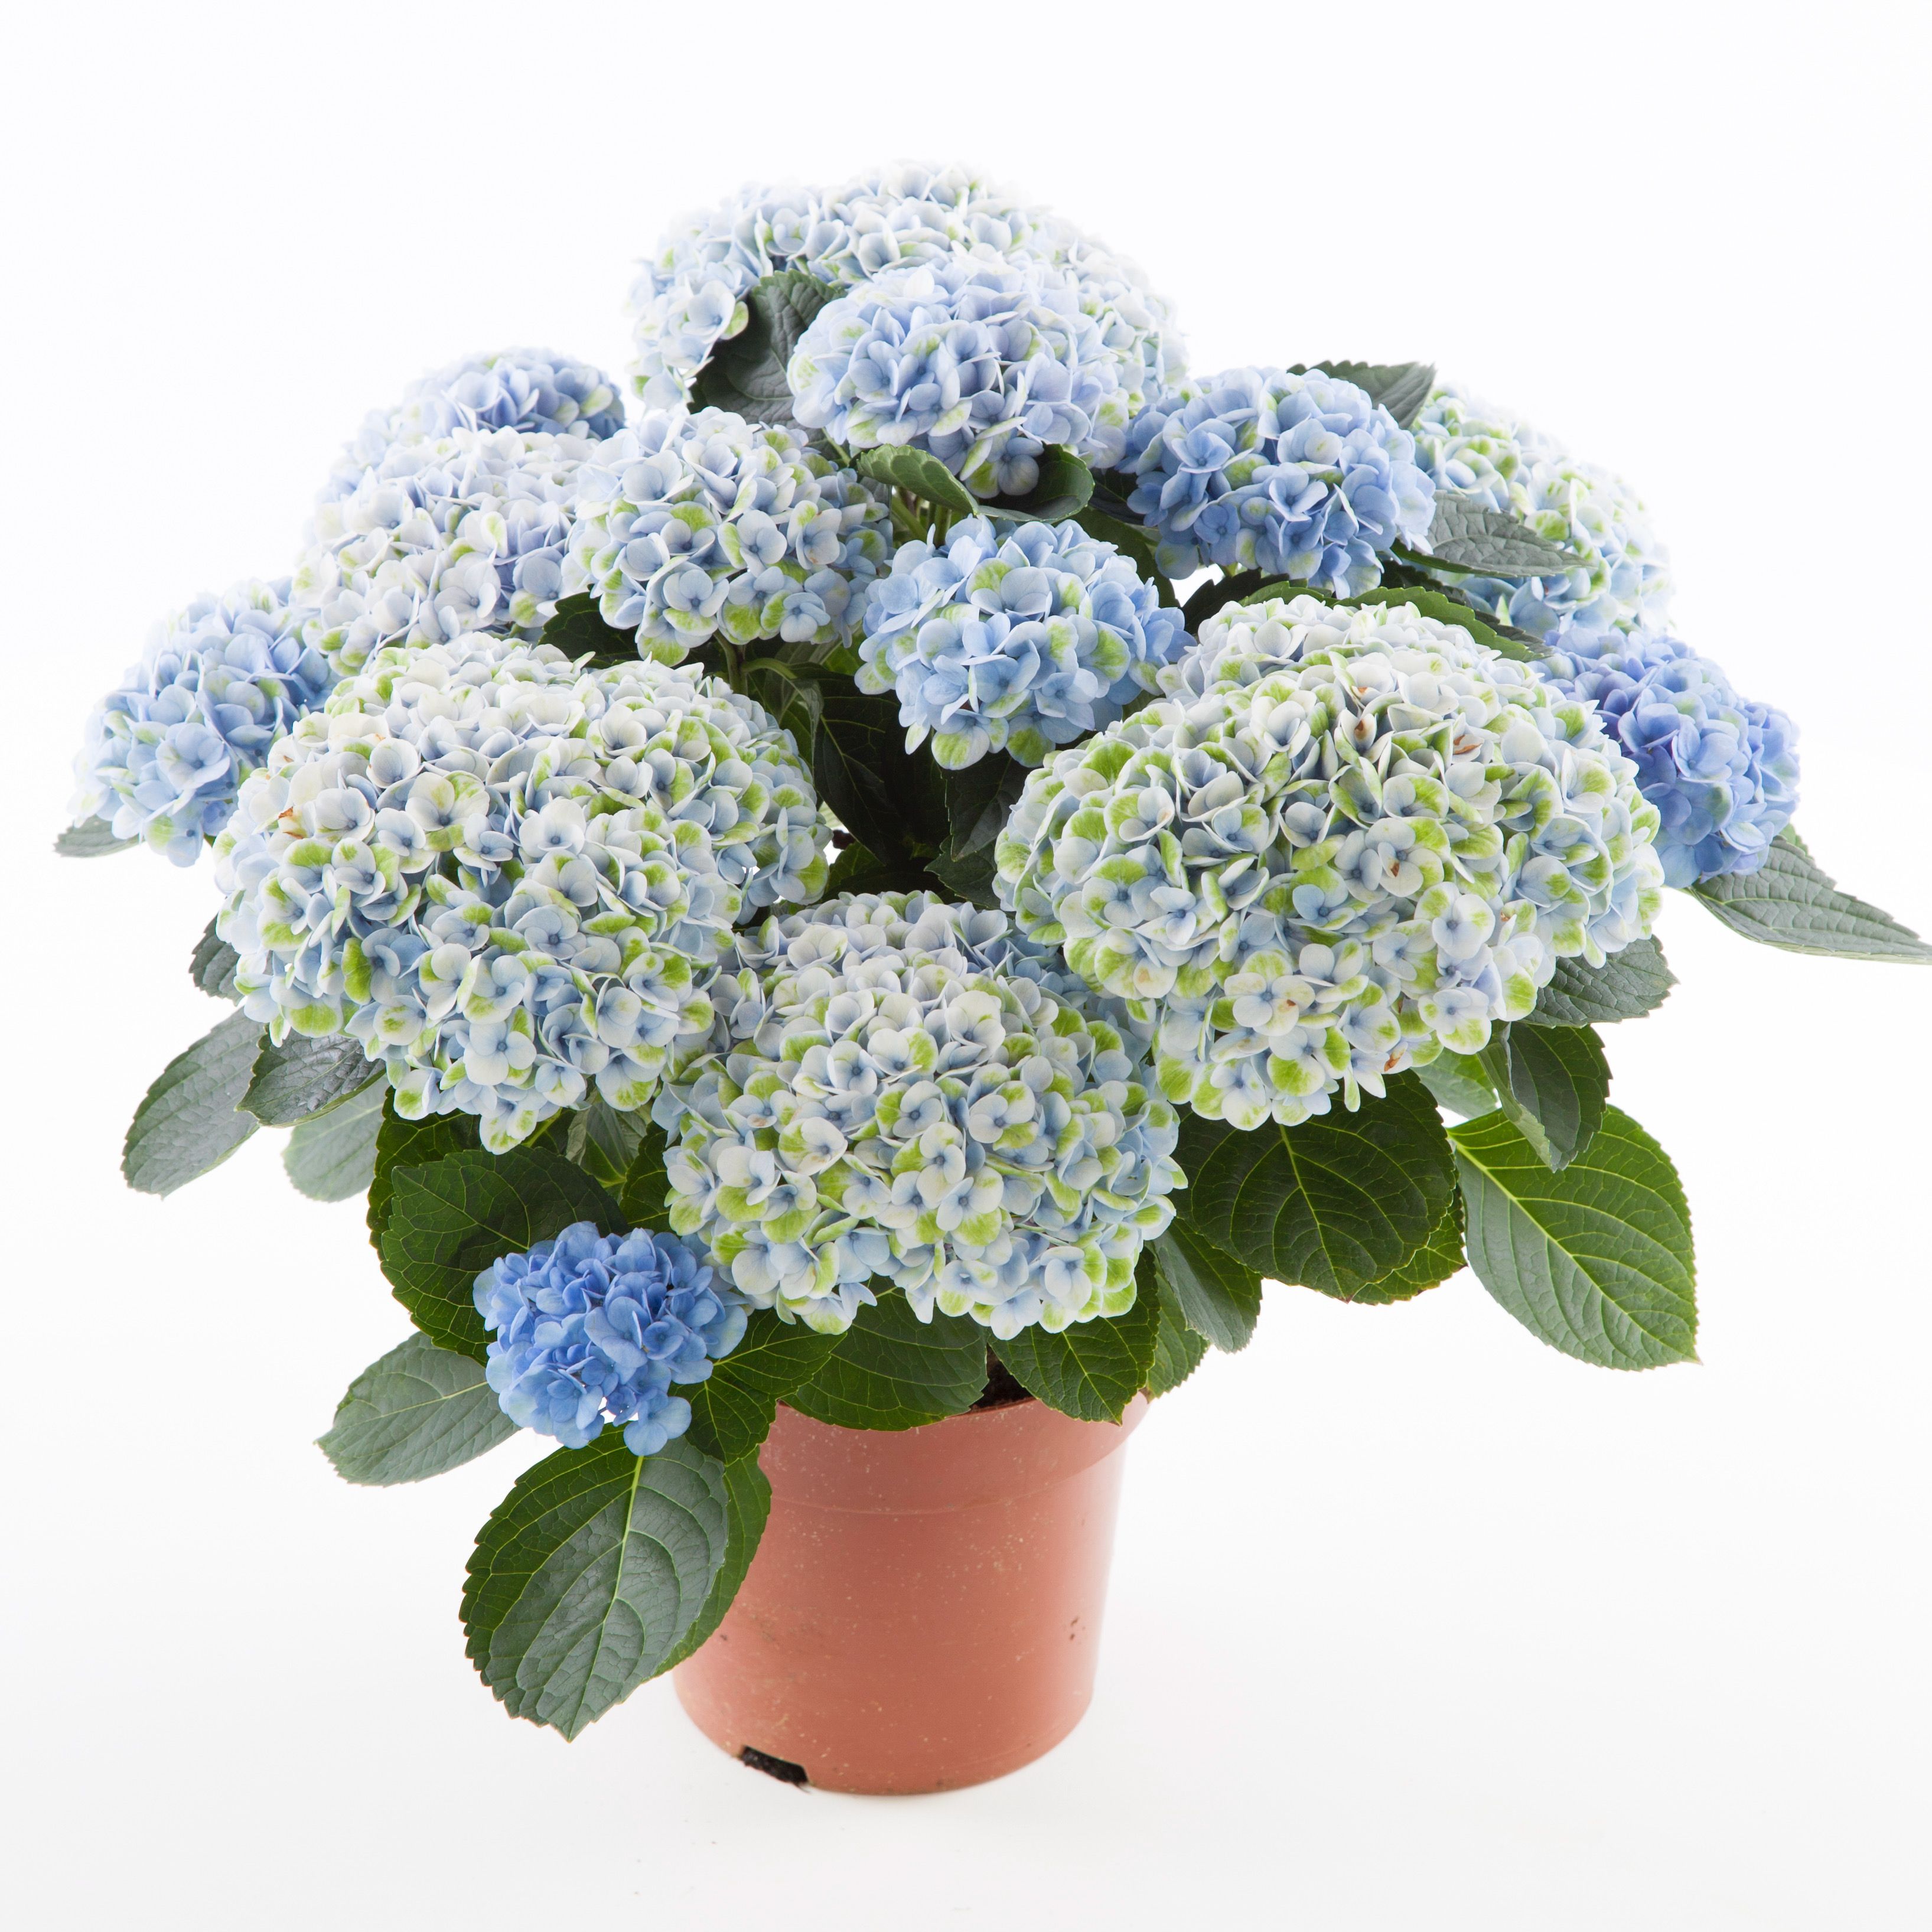 images/plants/hydrangea/hyd-magical-everlasting-revolution/hyd-magical-everlasting-revolution-0098.jpg